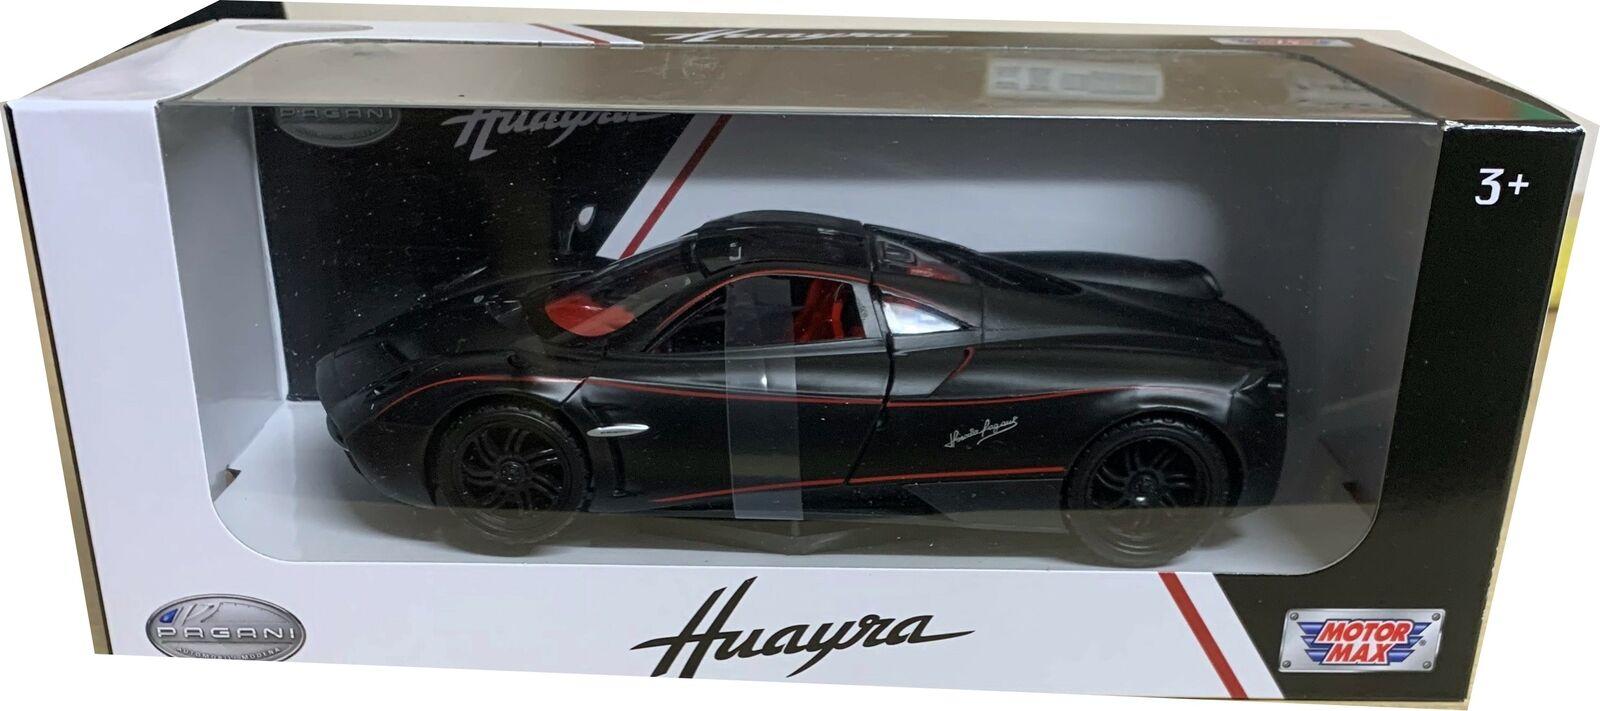 he model is presented in a window display box, the car is approx. 19 cm long and the presentation box is 24.5 cm long